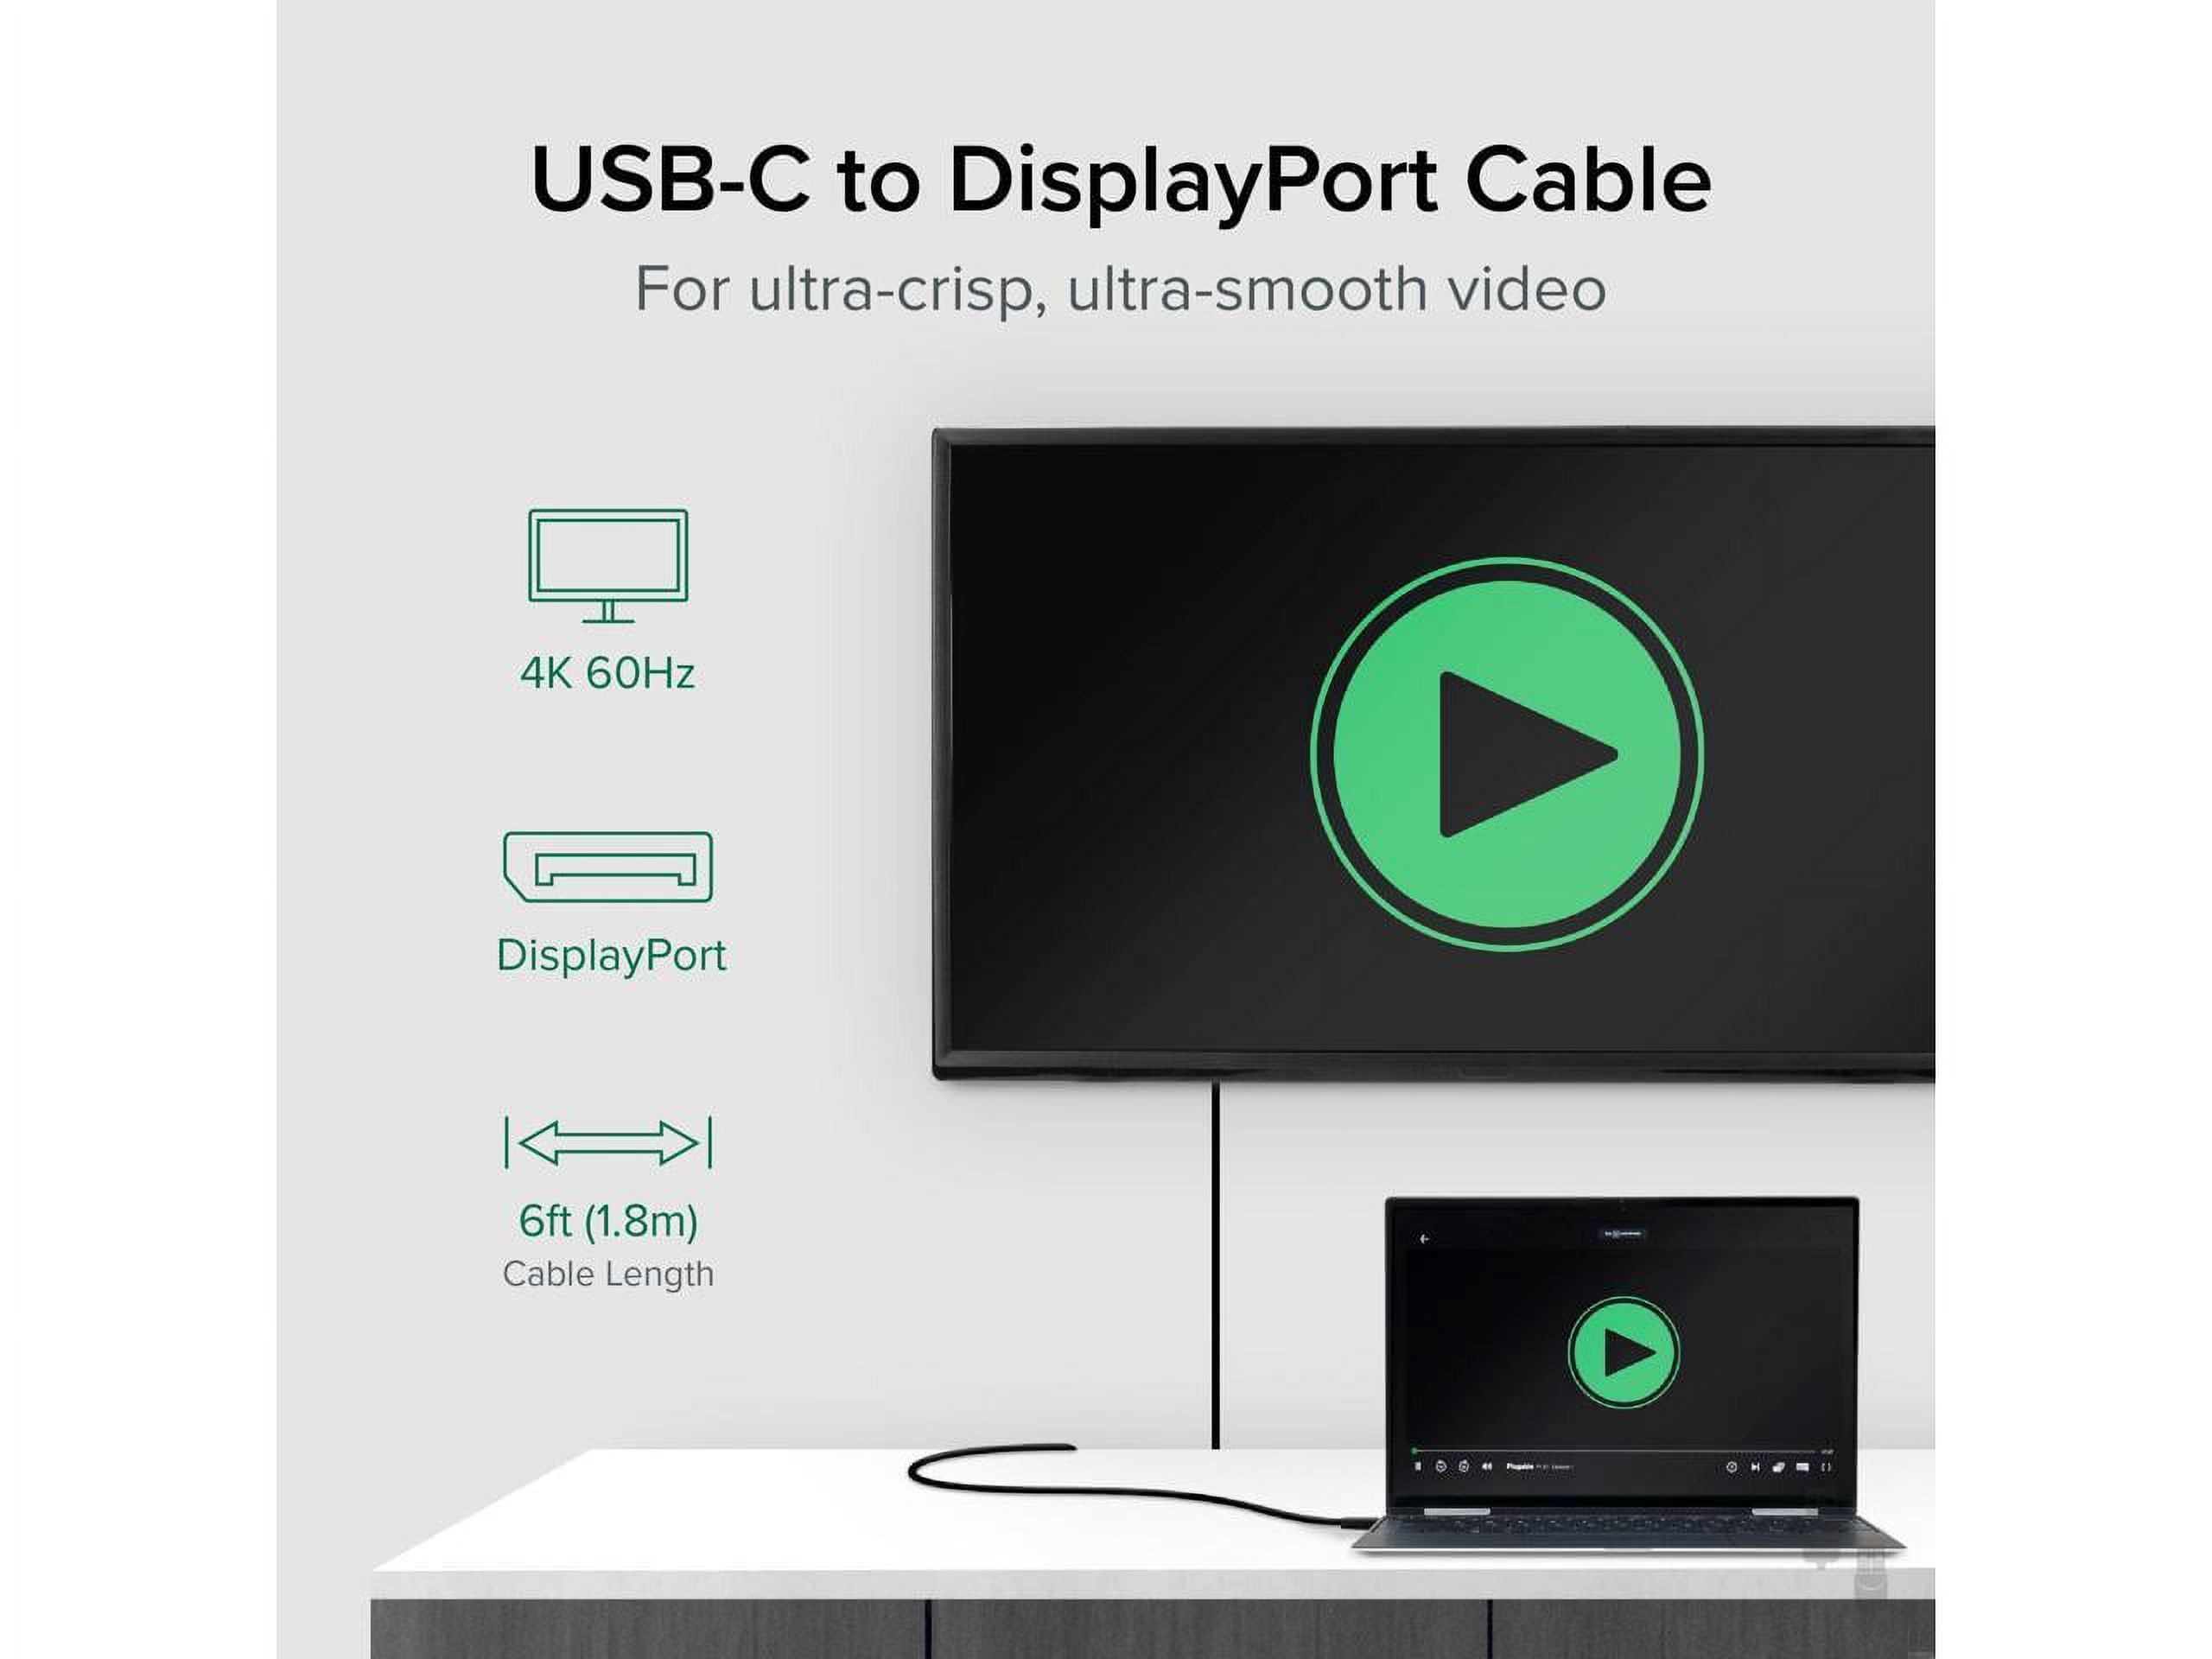 Plugable USB C to DisplayPort Cable 6 feet (1.8m), Up to 4K at 60Hz, USB C DisplayPort Cable - Compatible with Thunderbolt and USB-C - Driverless - image 2 of 7